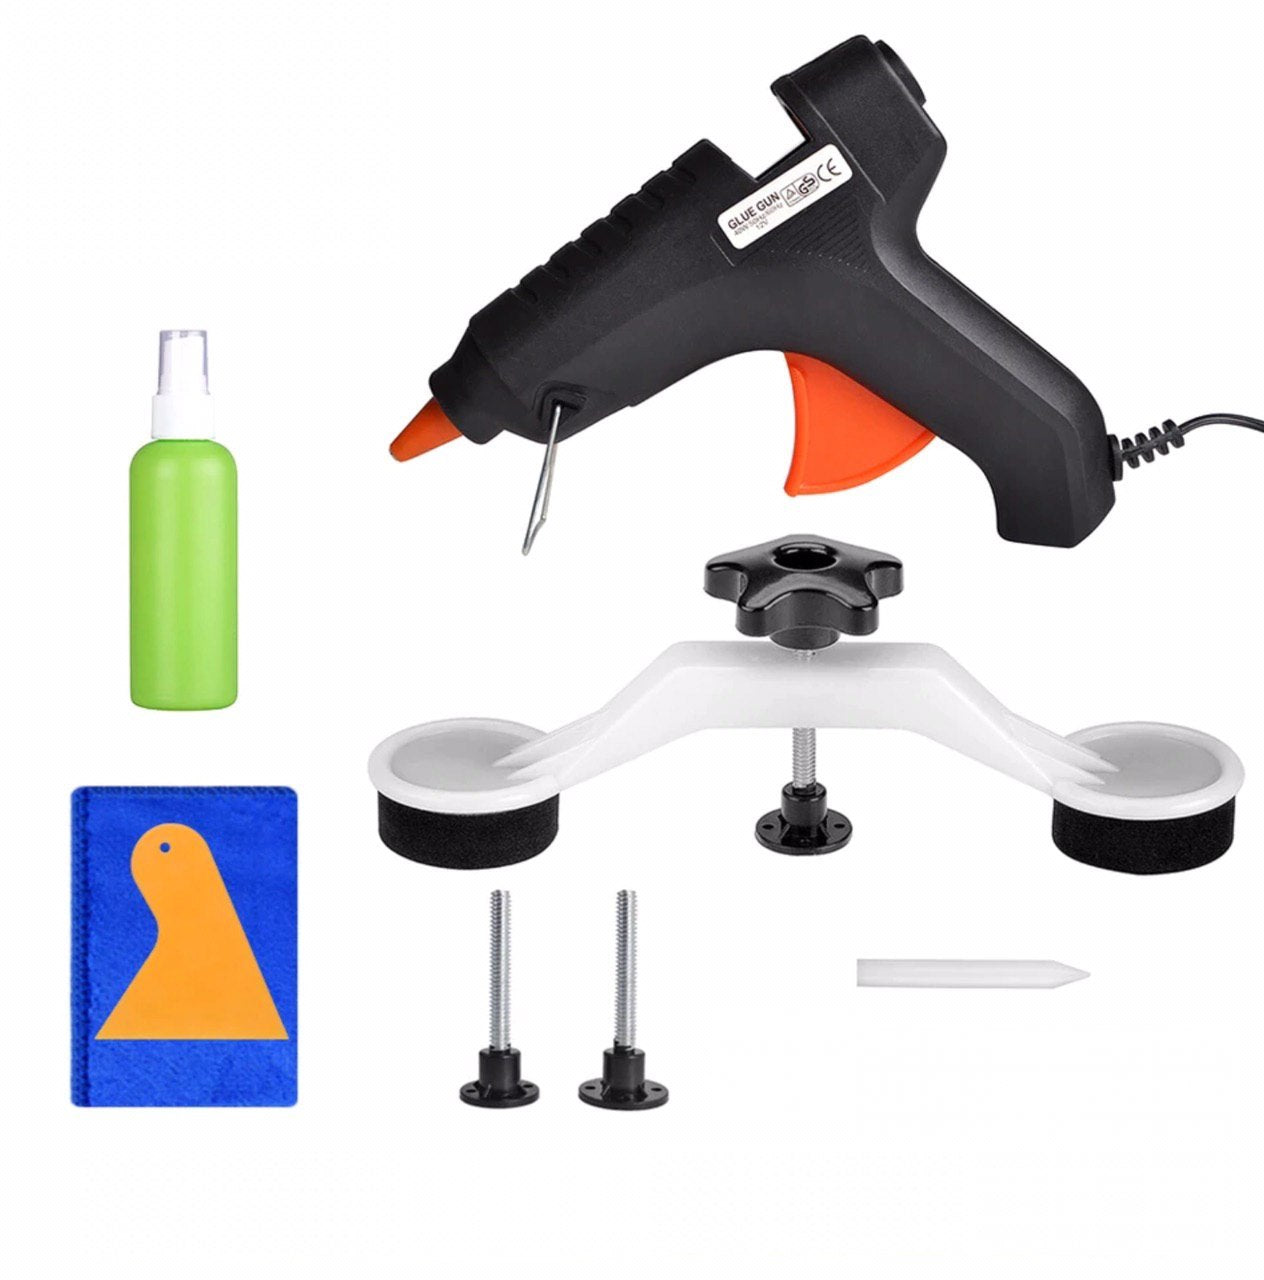 PDR KIT Paintless Dent Repair Tools Dent Repair Kit Car Dent Puller with Glue Puller Tabs Removal Kits for Vehicle Car Auto